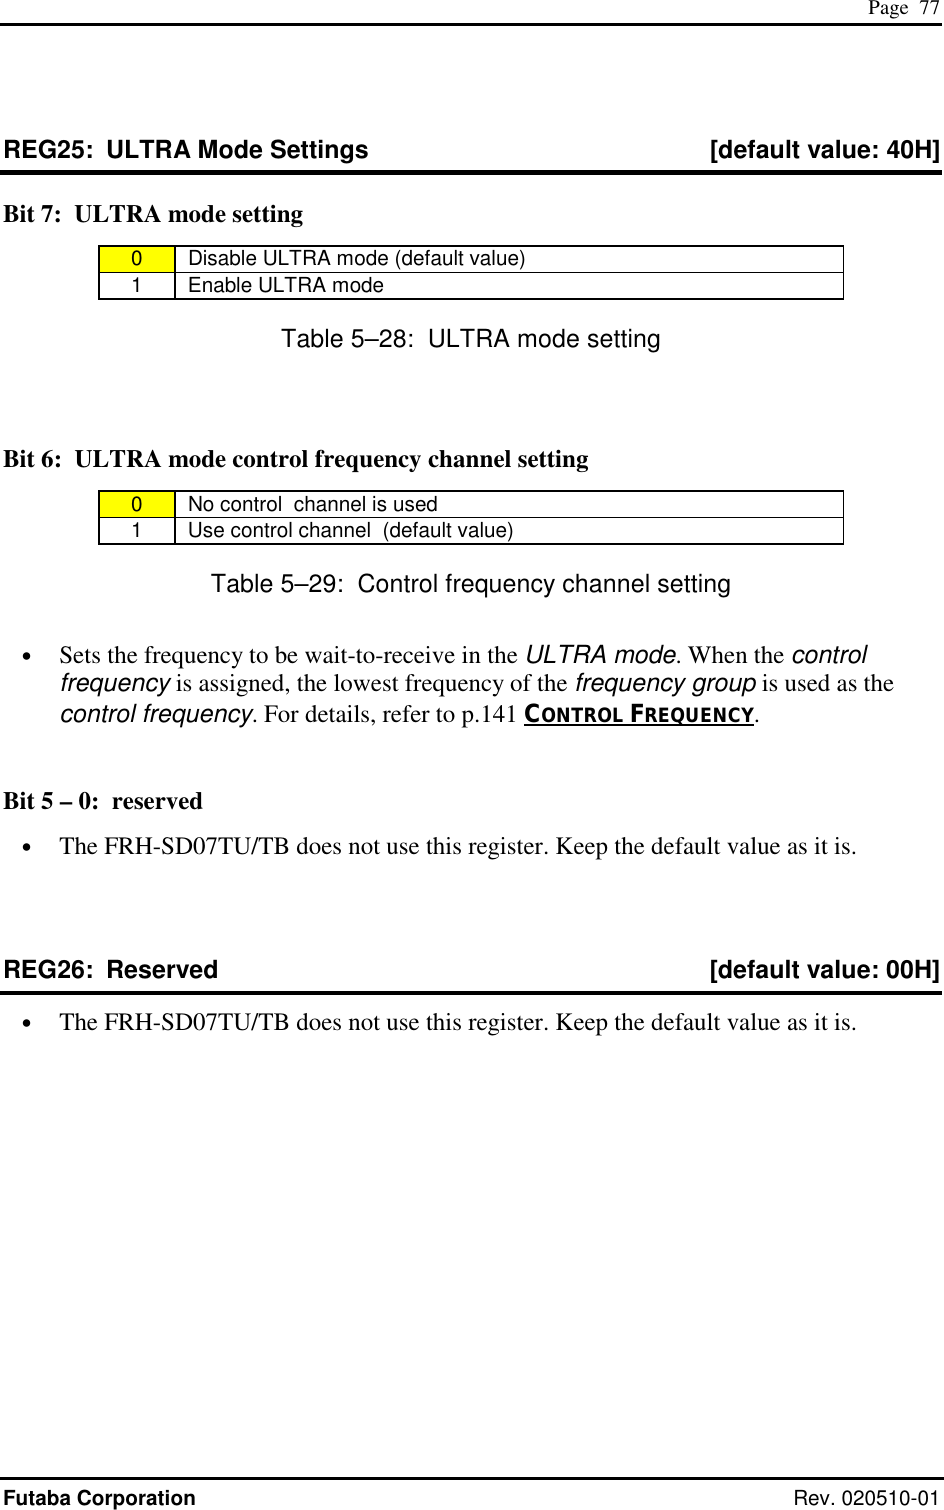  Page  77 Futaba Corporation Rev. 020510-01 REG25:  ULTRA Mode Settings  [default value: 40H] Bit 7:  ULTRA mode setting 0   Disable ULTRA mode (default value) 1   Enable ULTRA mode Table 5–28:  ULTRA mode setting  Bit 6:  ULTRA mode control frequency channel setting 0   No control  channel is used 1   Use control channel  (default value) Table 5–29:  Control frequency channel setting •  Sets the frequency to be wait-to-receive in the ULTRA mode. When the control frequency is assigned, the lowest frequency of the frequency group is used as the control frequency. For details, refer to p.141 CONTROL FREQUENCY.  Bit 5 – 0:  reserved •  The FRH-SD07TU/TB does not use this register. Keep the default value as it is.  REG26:  Reserved  [default value: 00H] •  The FRH-SD07TU/TB does not use this register. Keep the default value as it is. 